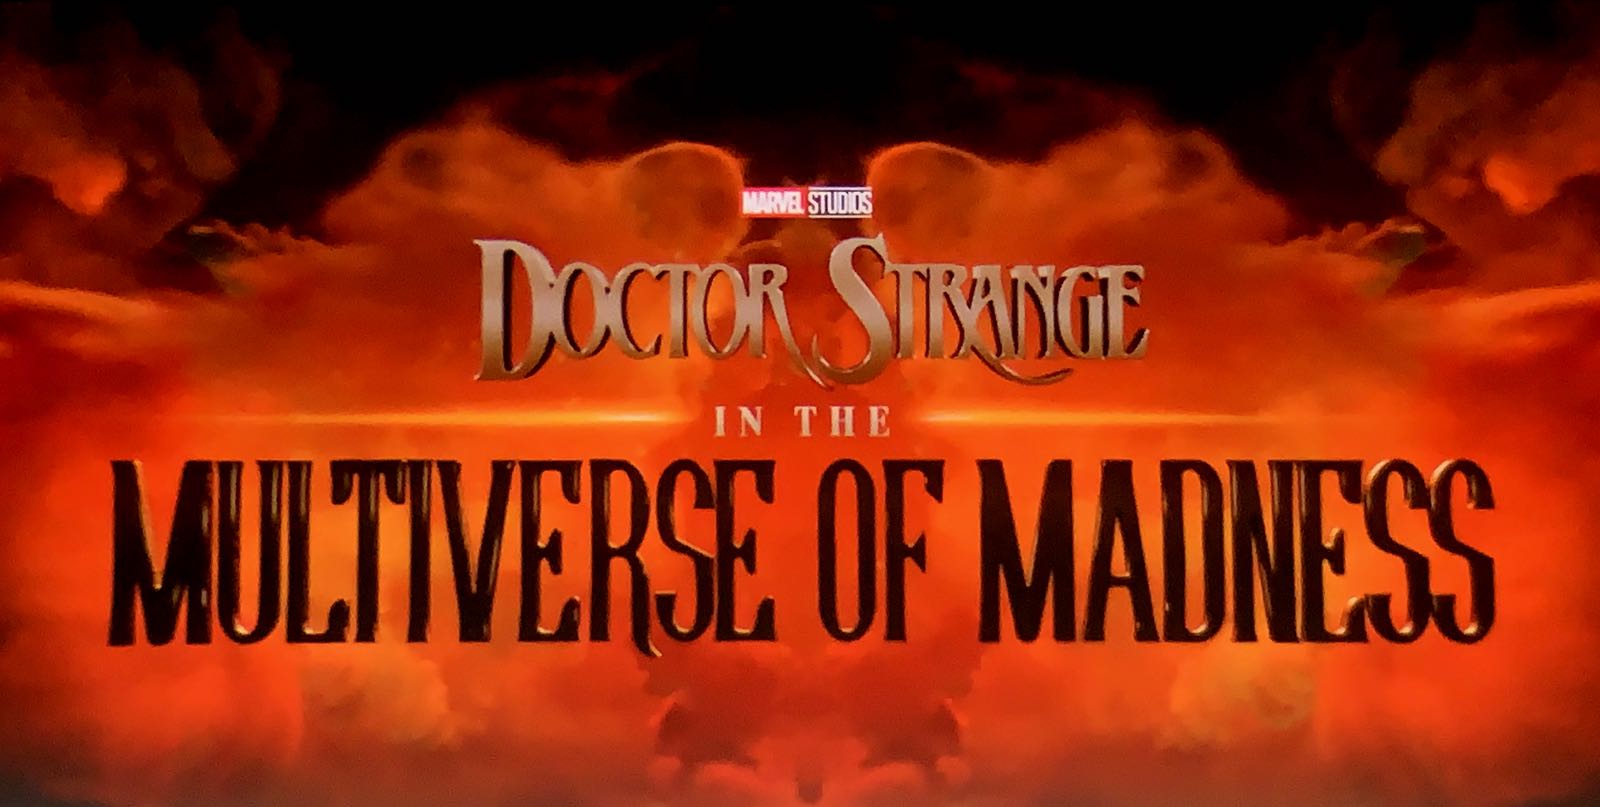 Doctor Strange in the Multiverse of Madness Release Date Postponed